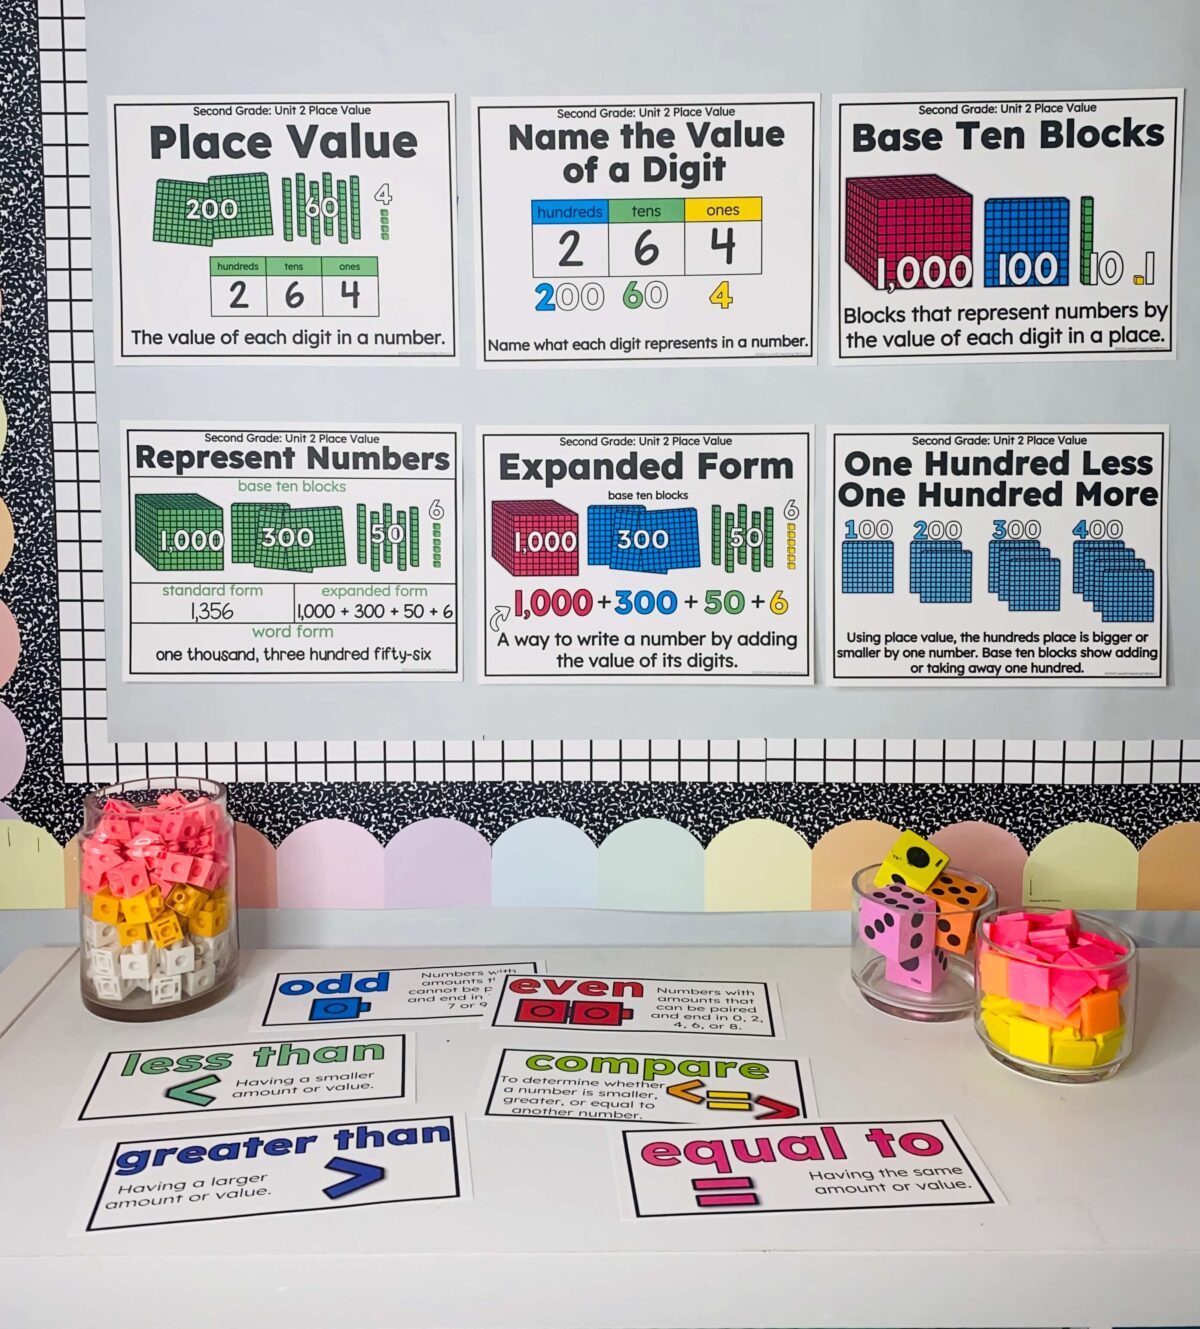 visual posters in a classroom showing place value